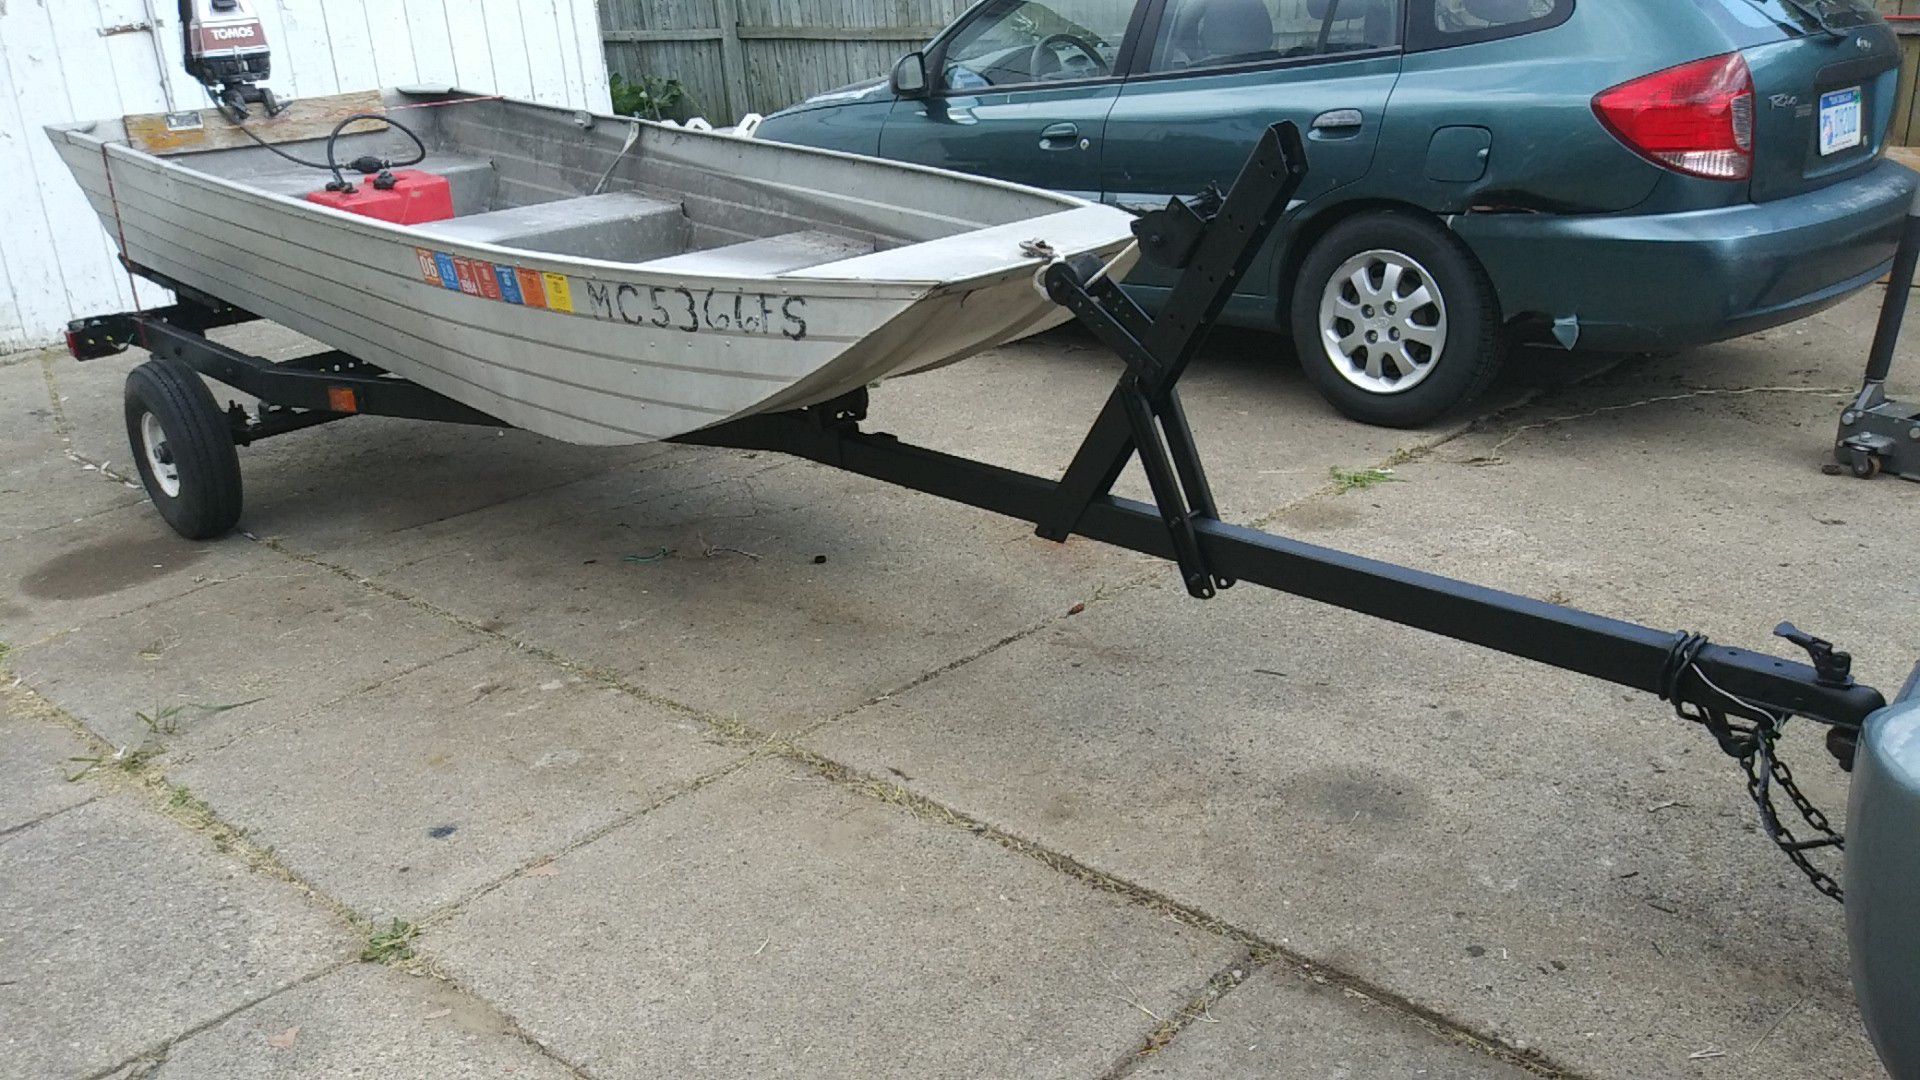 12 ft Jon boat with motor and trailer